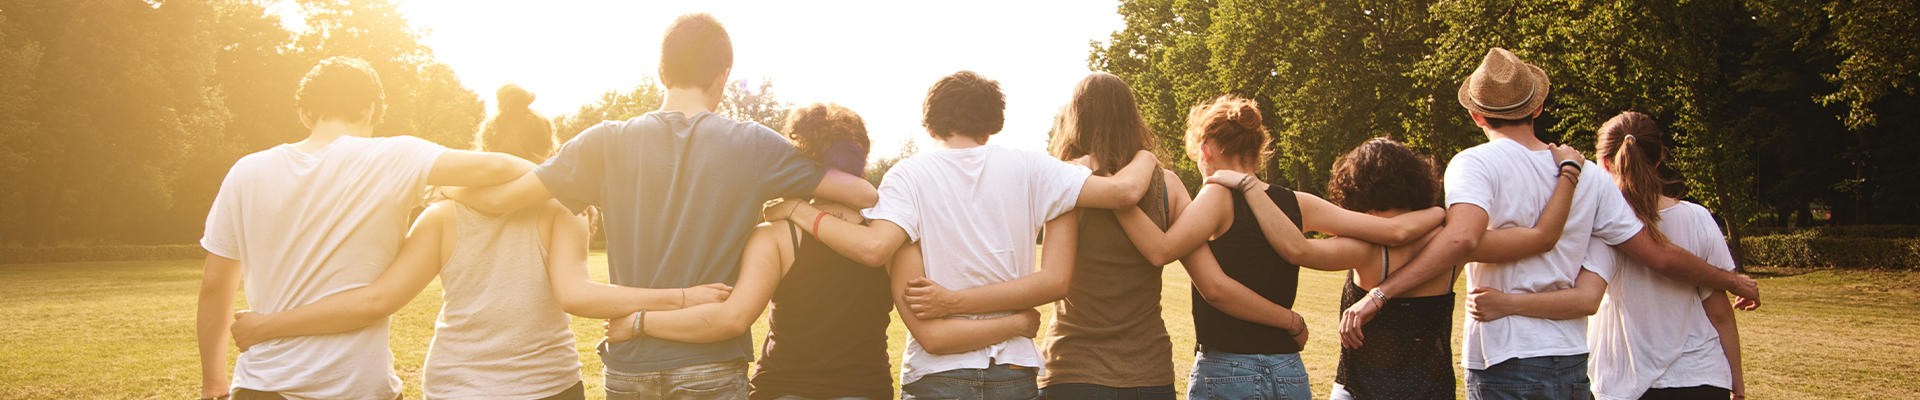 group of friends holding each other